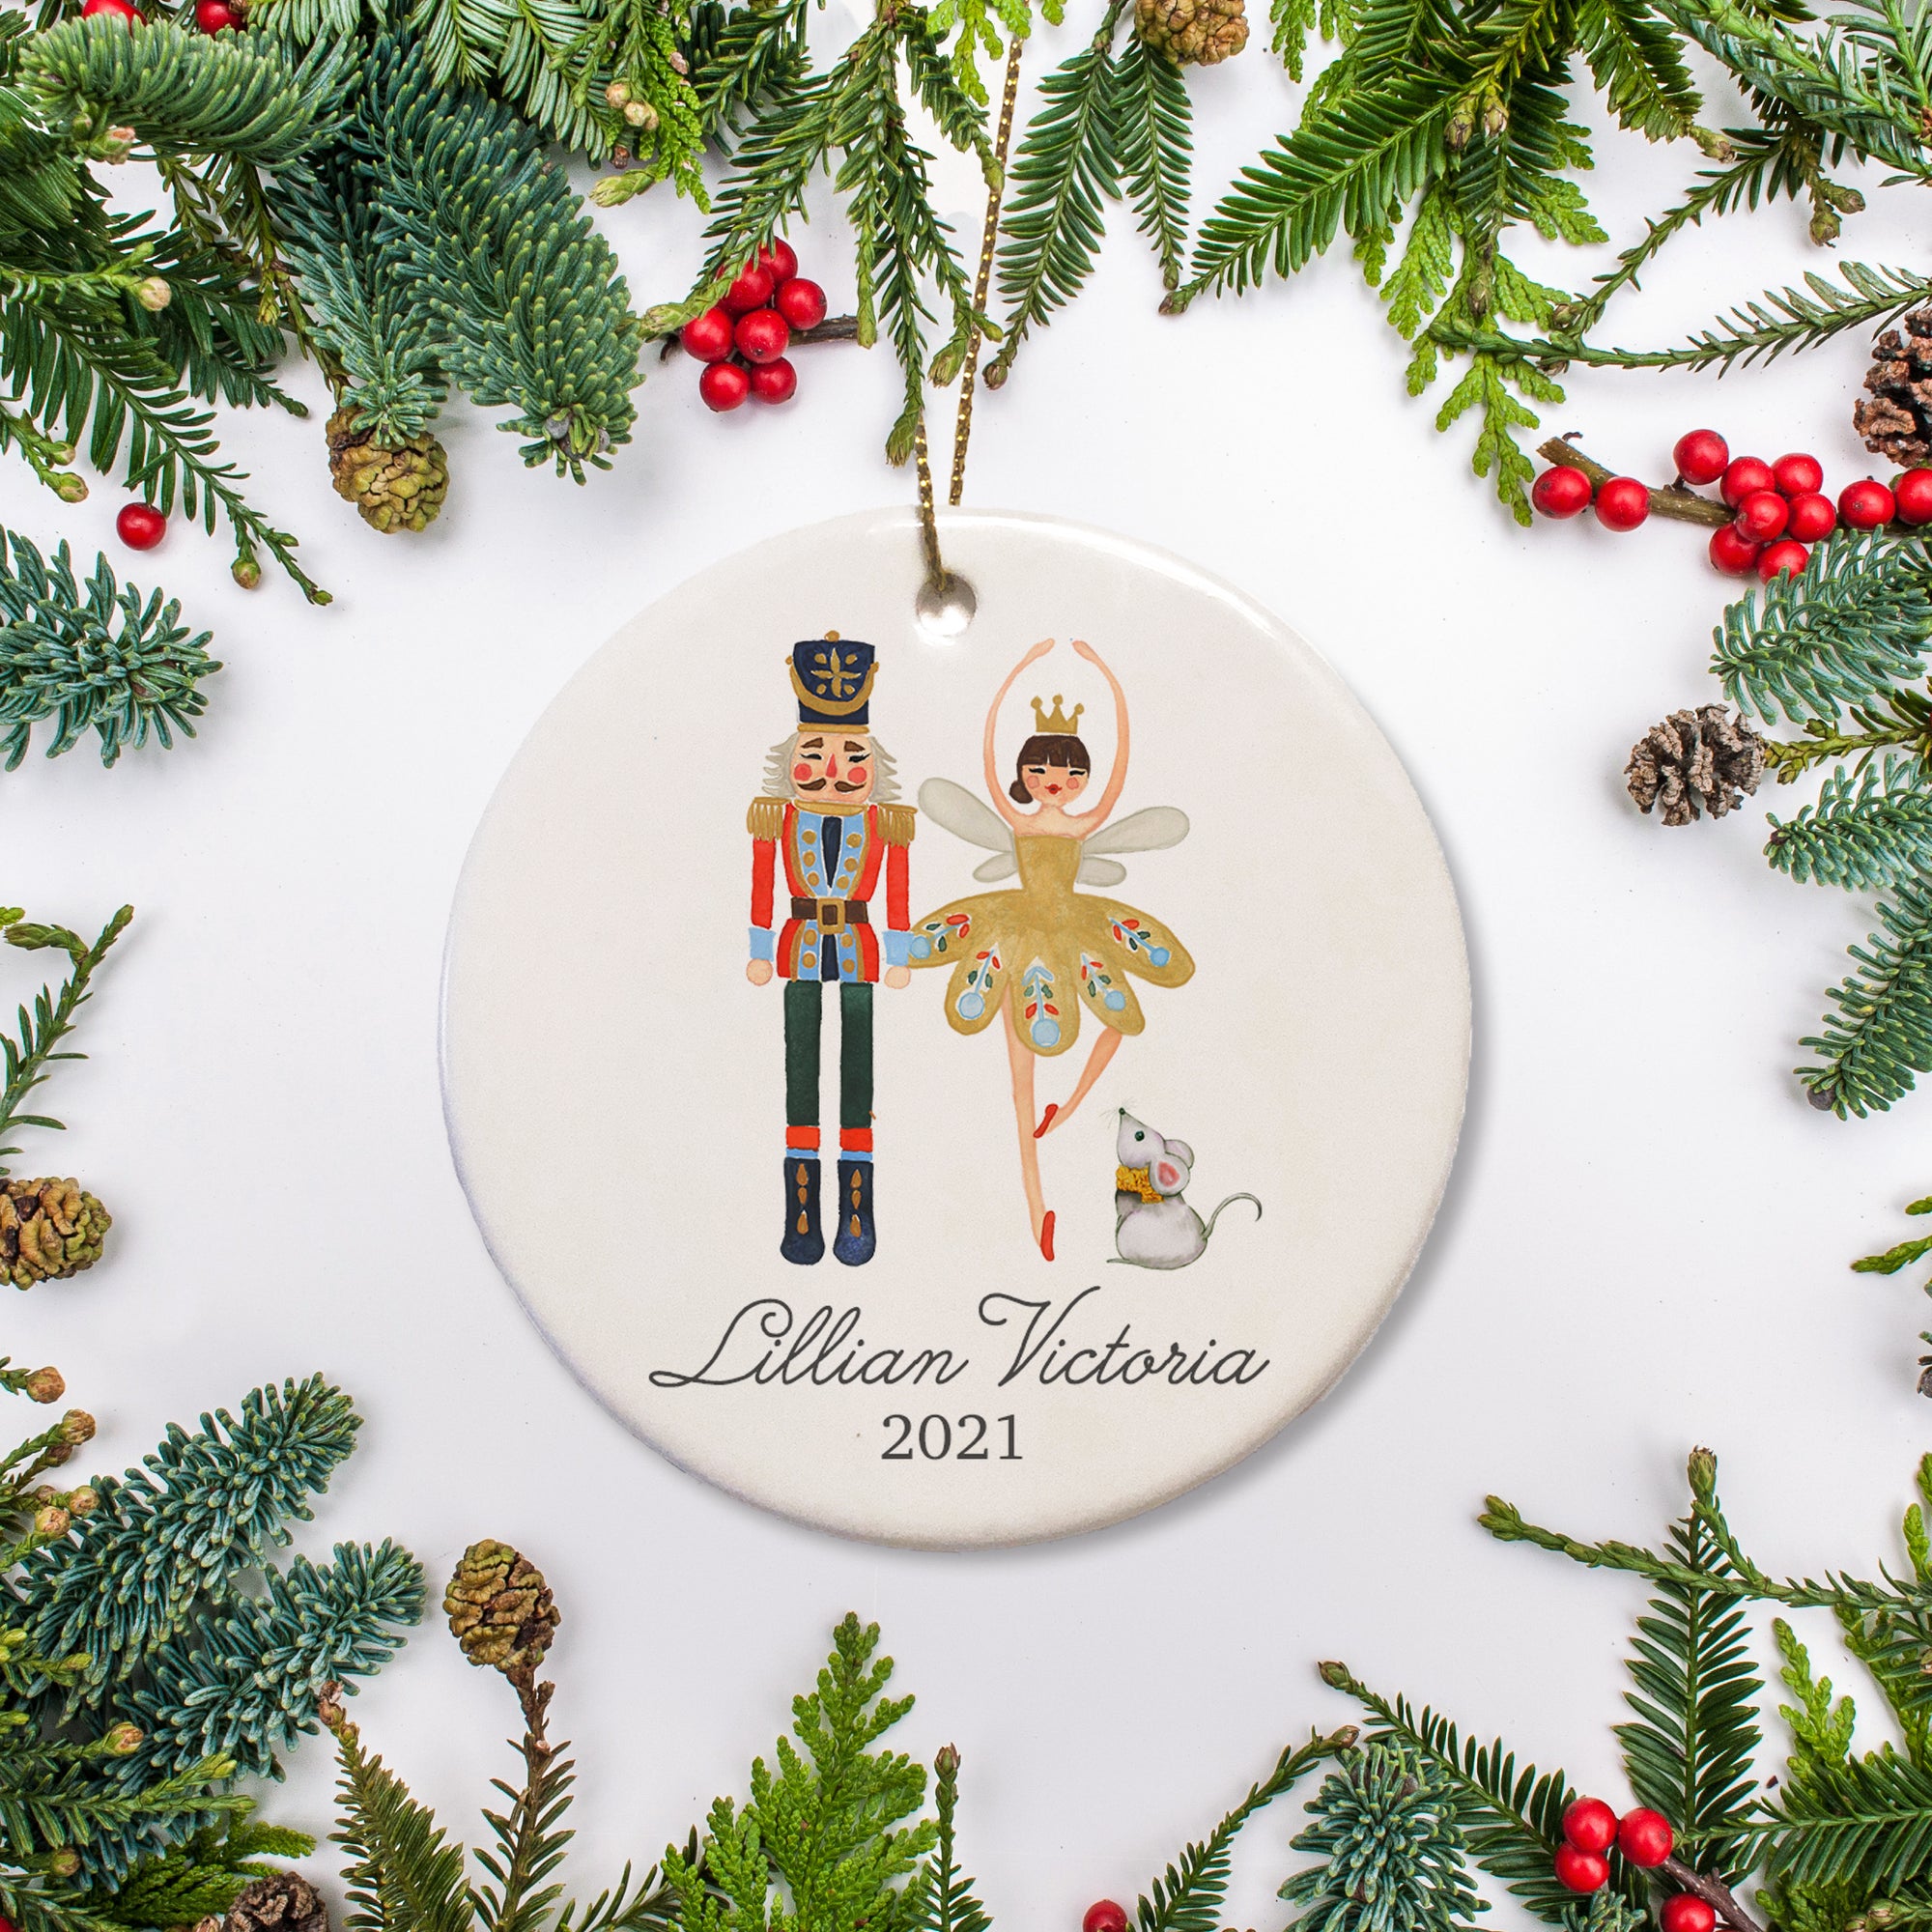 Personalized Christmas ornament featuring Nutcracker performance - Soldier, Ballerina and Mouse Gift - Personalize with name and year of your choice | Pipsy.com